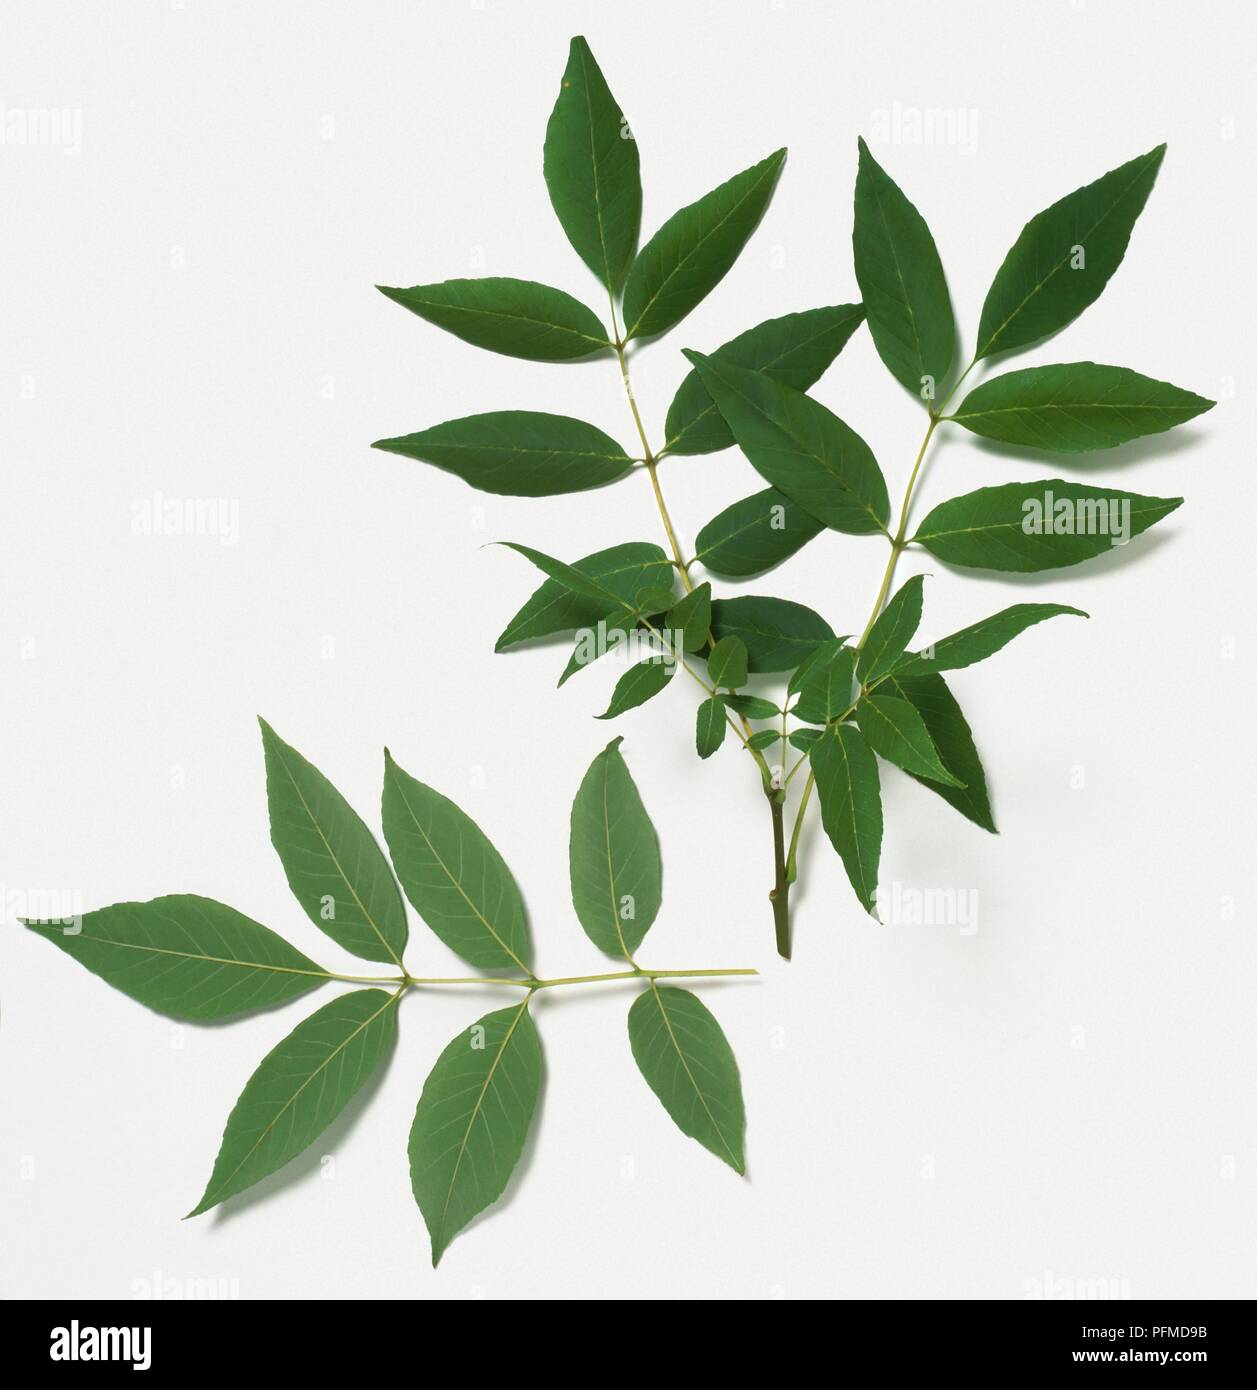 Fraxinus americana (White Ash), green leaves on stems Stock Photo